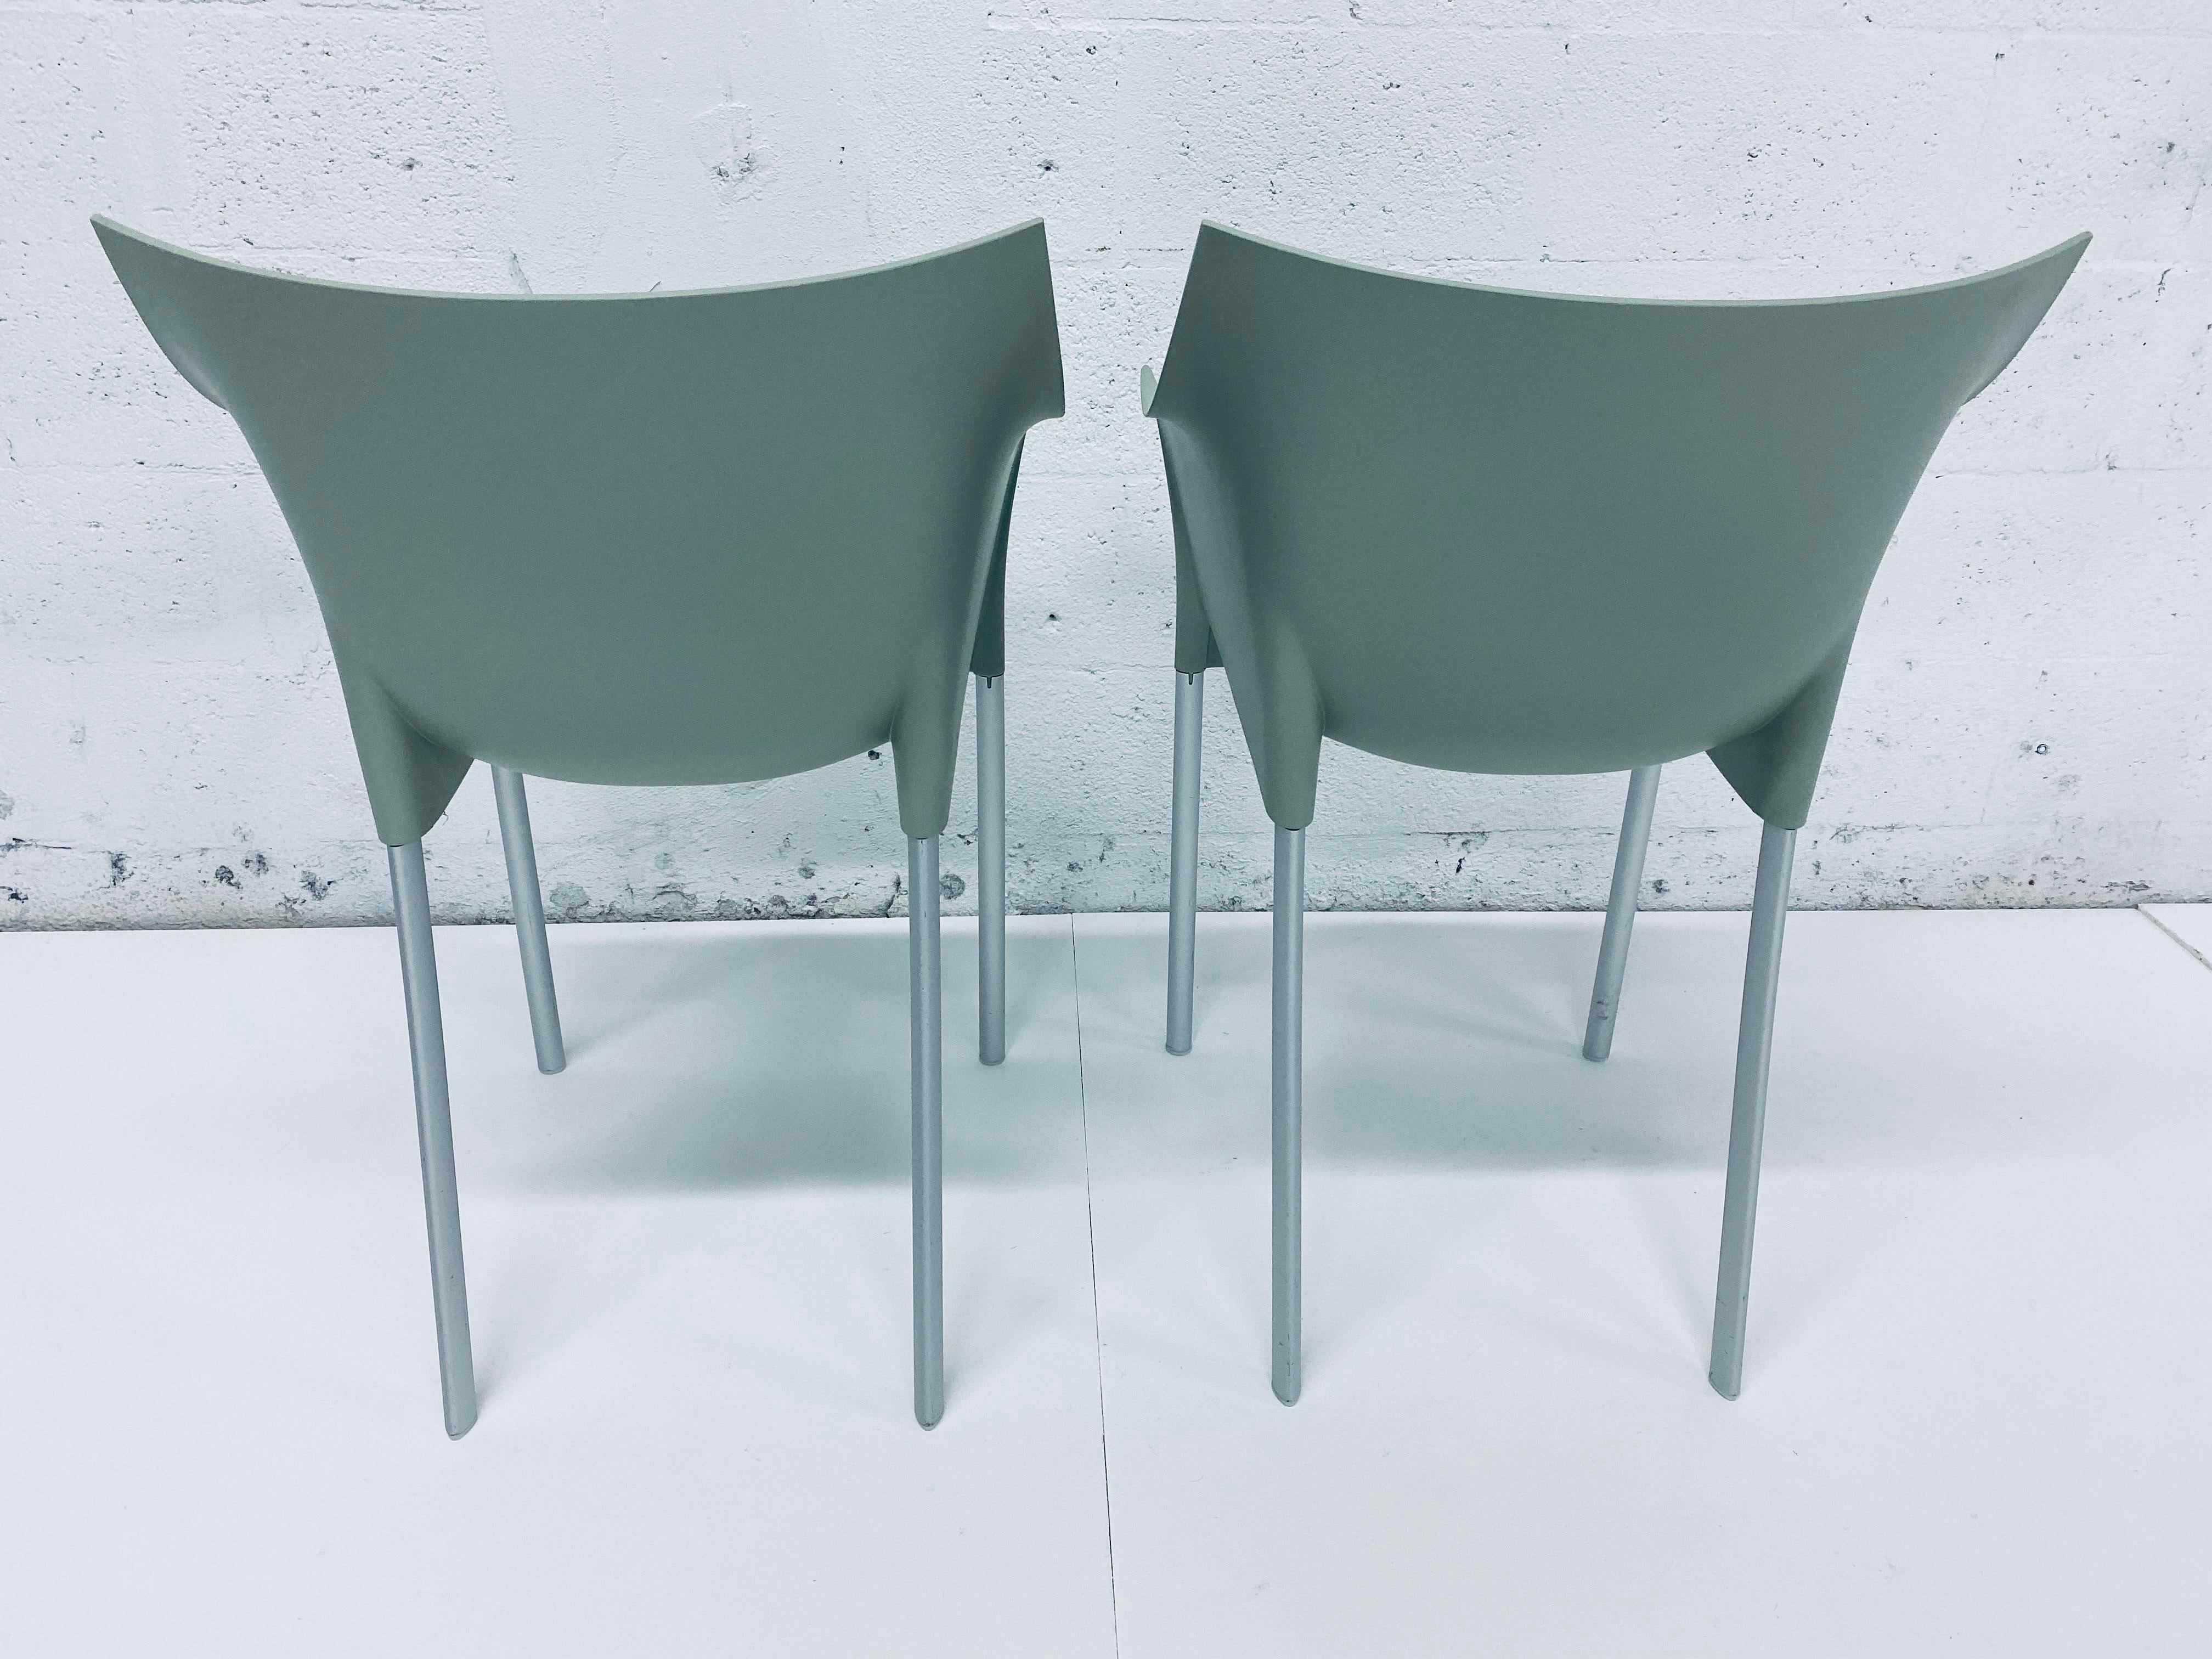 Contemporary Pair of Philipp Starck “Dr. No” Chairs for Kartell